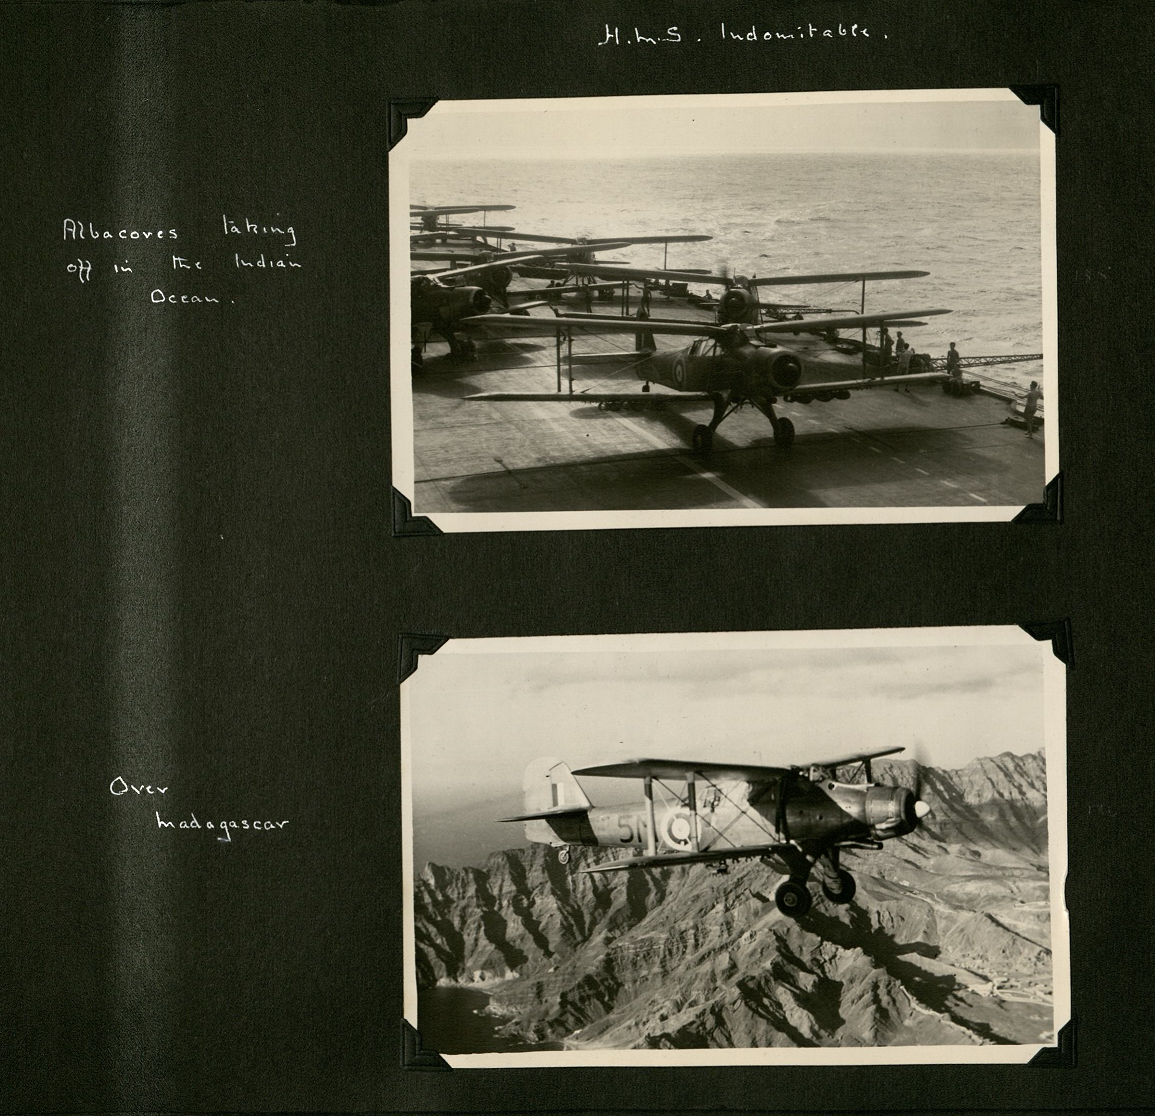 Two black and white photos, one of a line of planes on an aircraft carrier, the second over mountainous terrain.